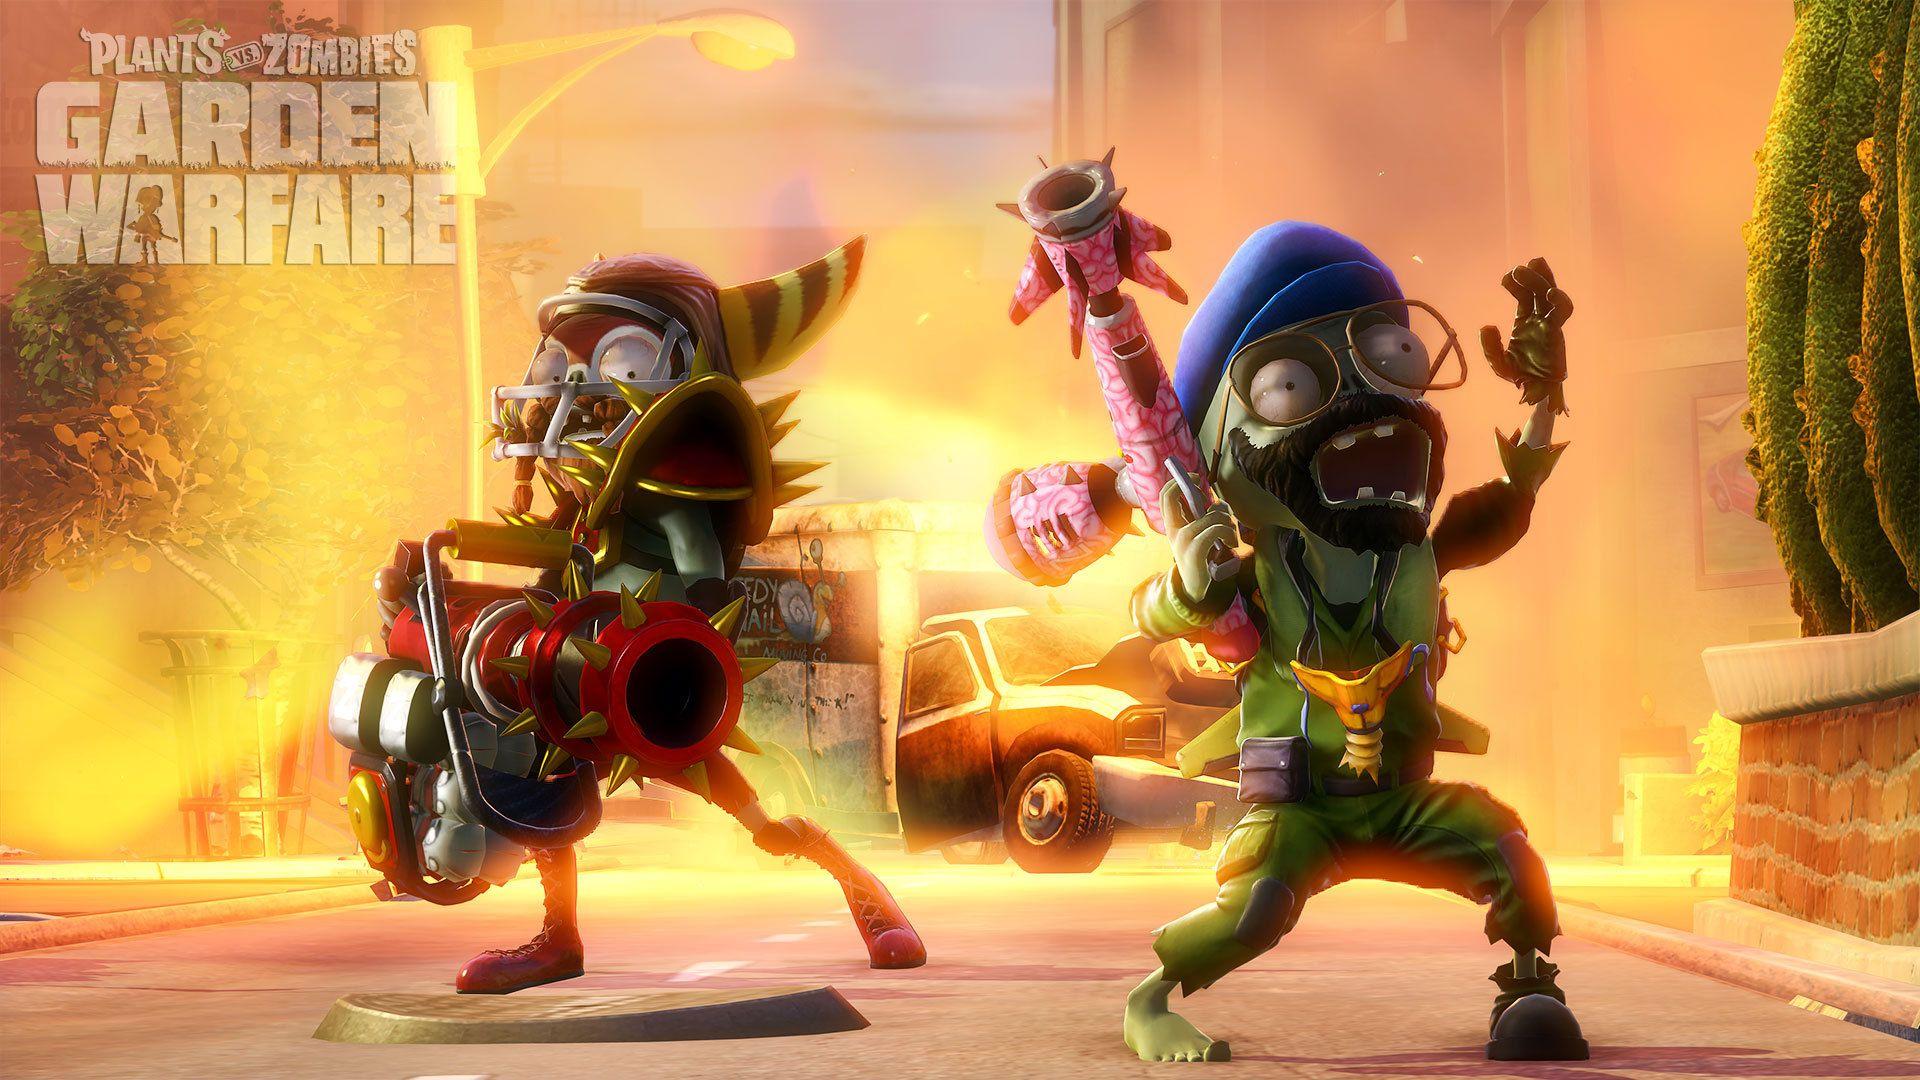 Plants vs. Zombies Garden Warfare Now Available for PlayStation